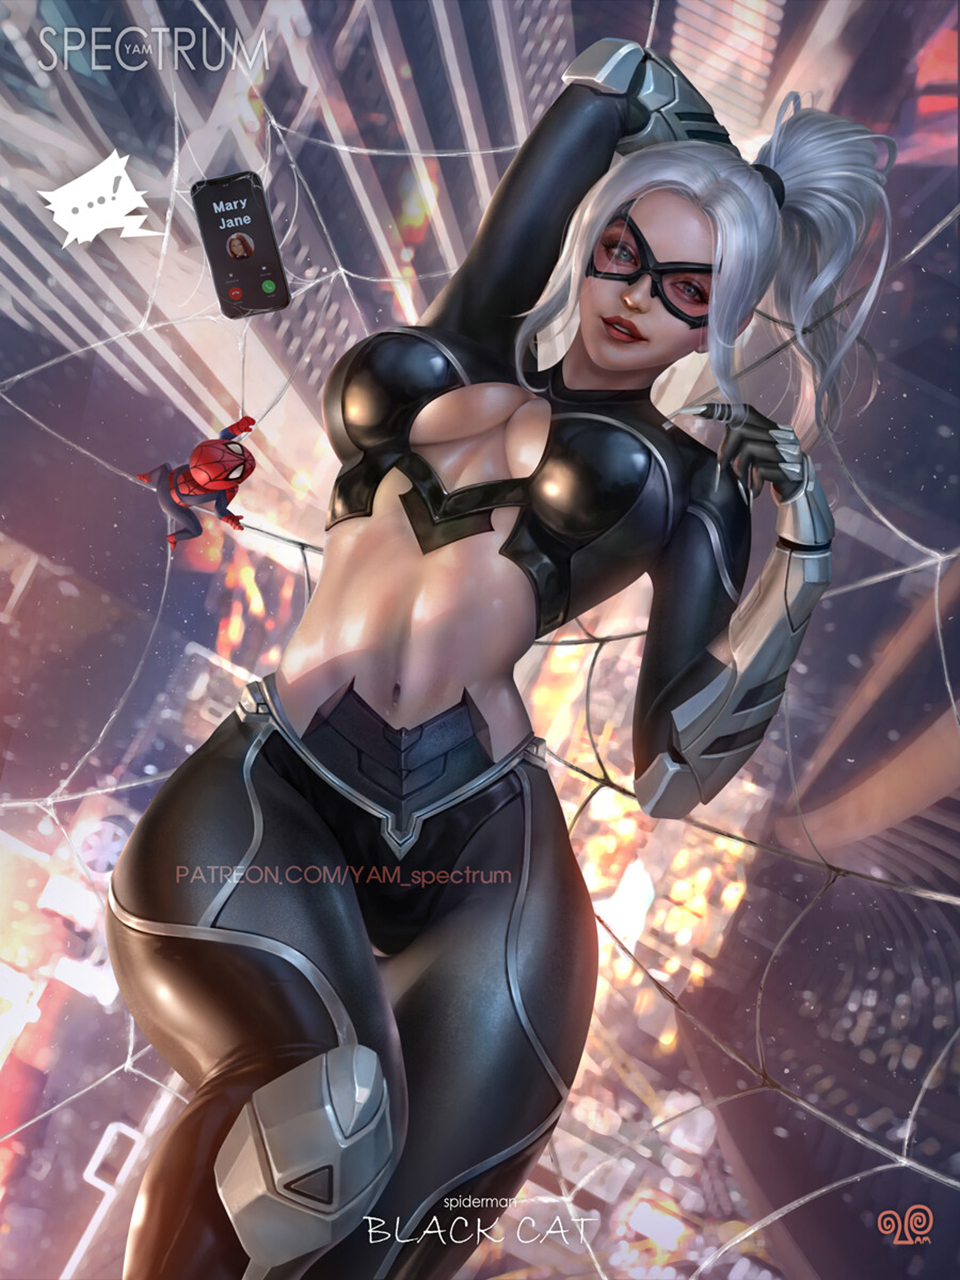 General 960x1280 Mansik Yang drawing Marvel Comics Spider-Man women Black Cat skimpy clothes black clothing spiderwebs phone top view frontal view speech bubble